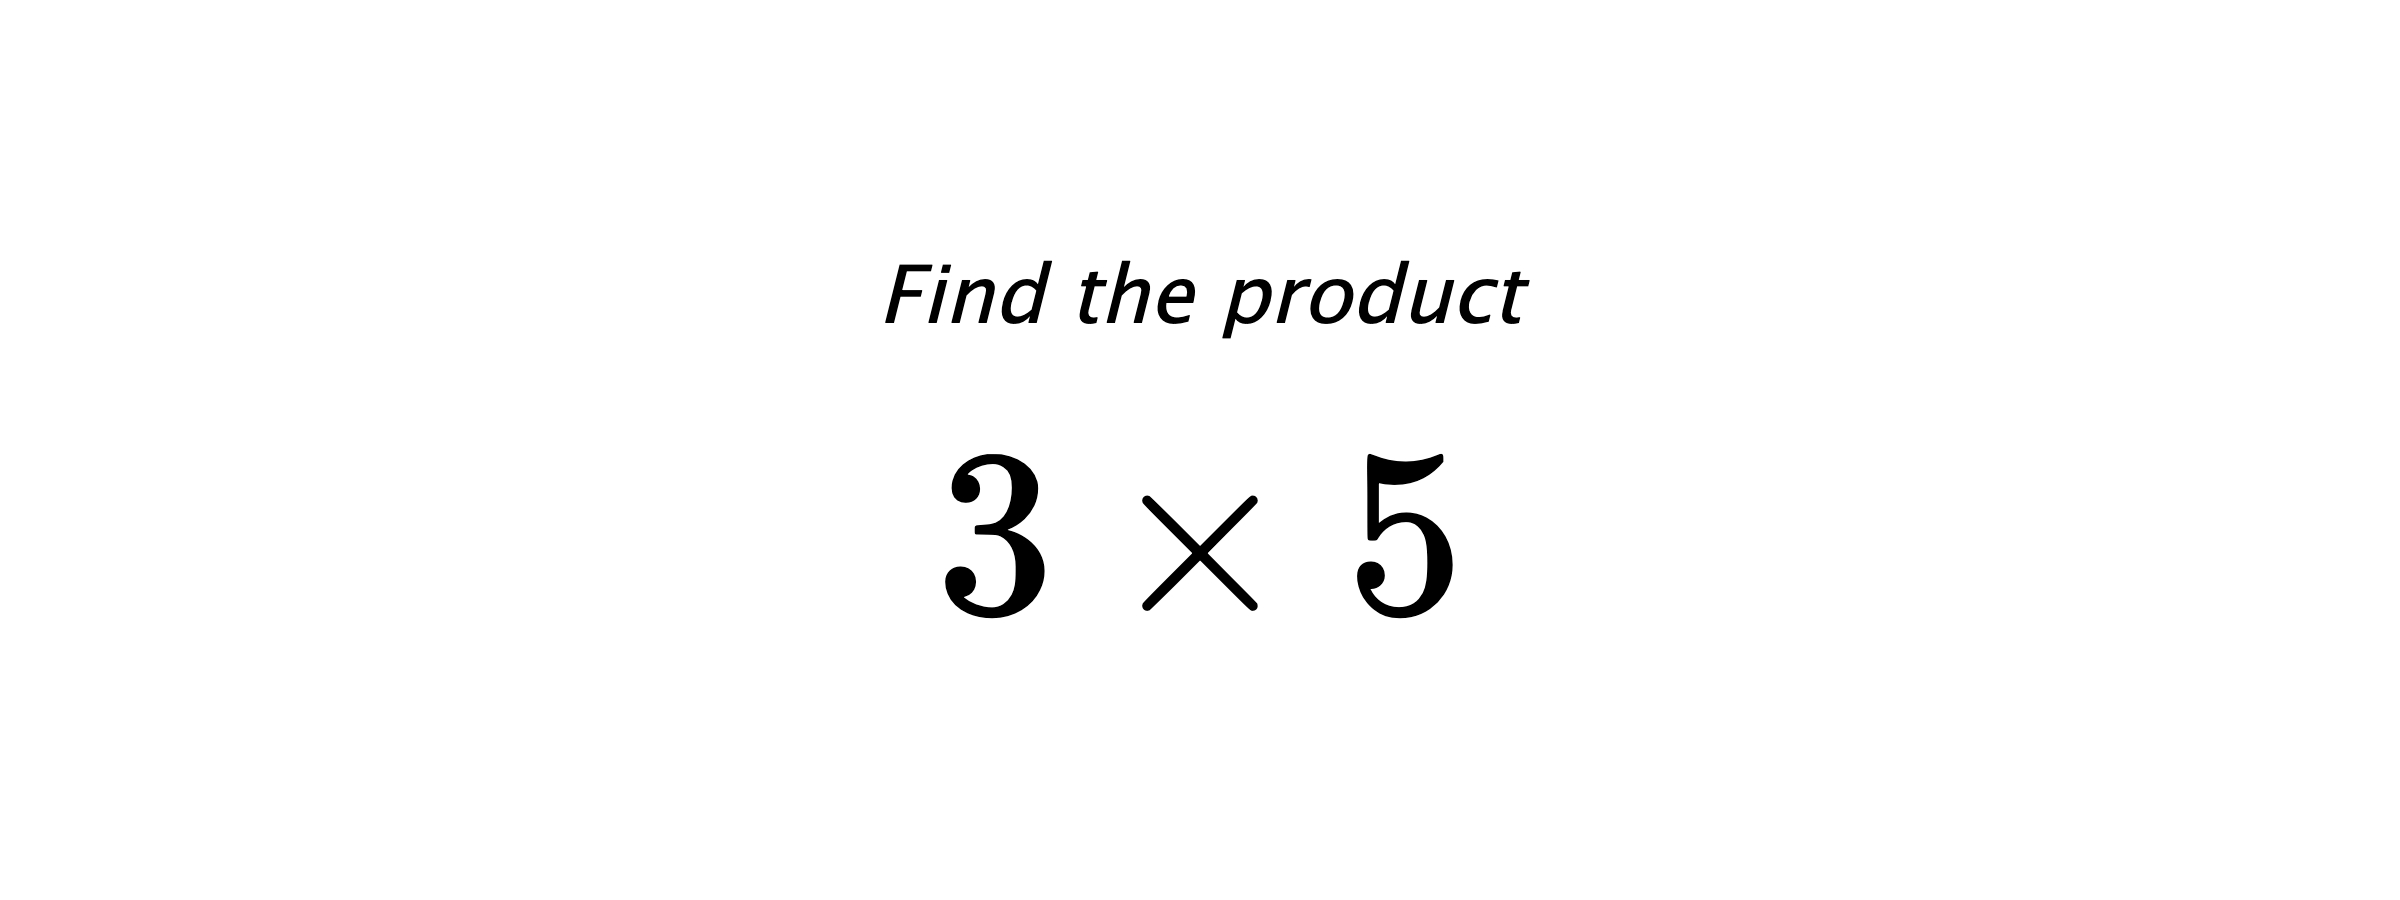 Find the product $ 3 \times 5 $